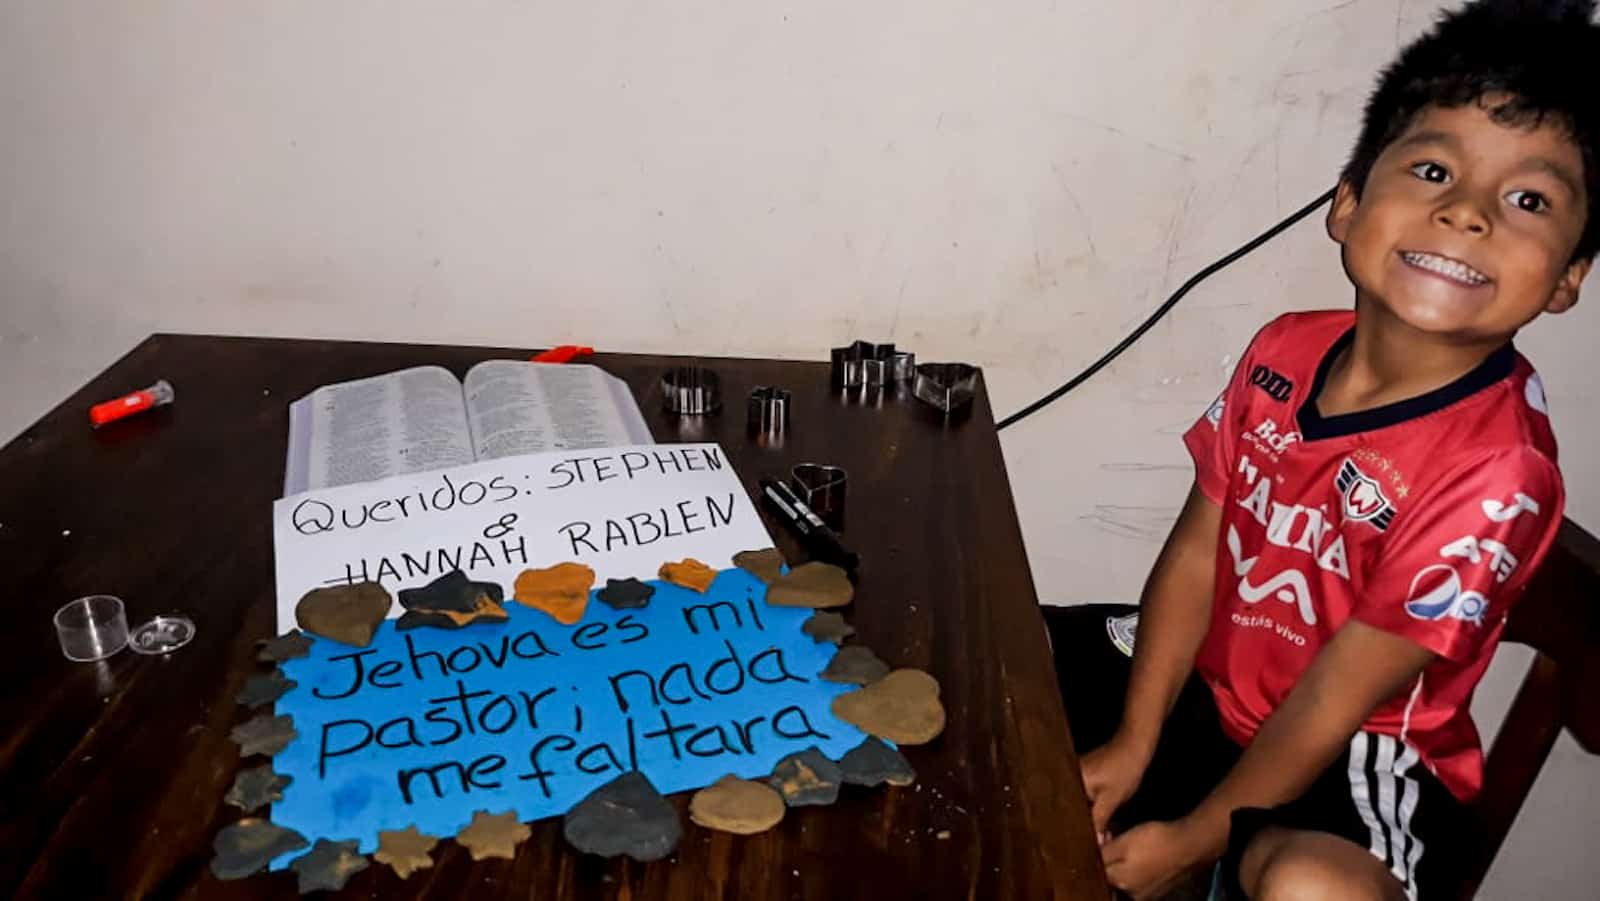 A boy sits by a table with a sign in Spanish